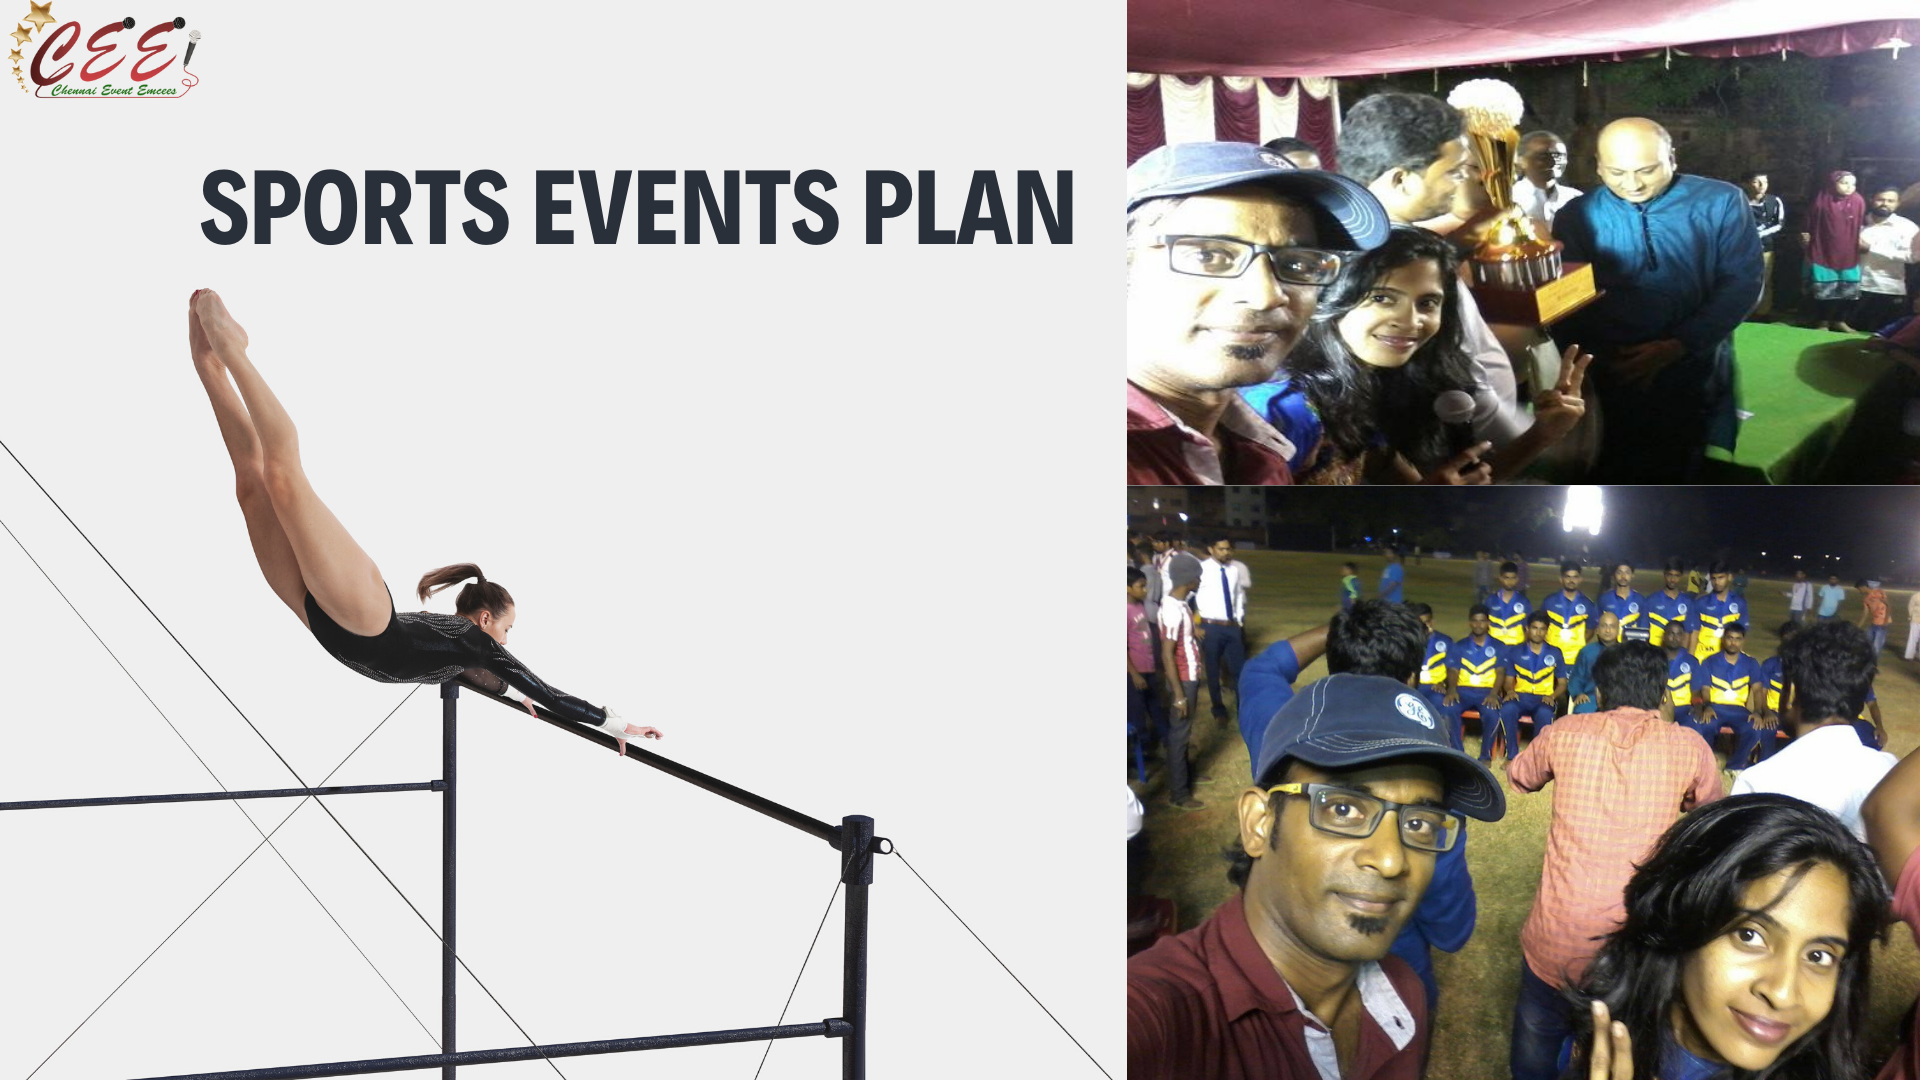 Event Plan for Sports Events